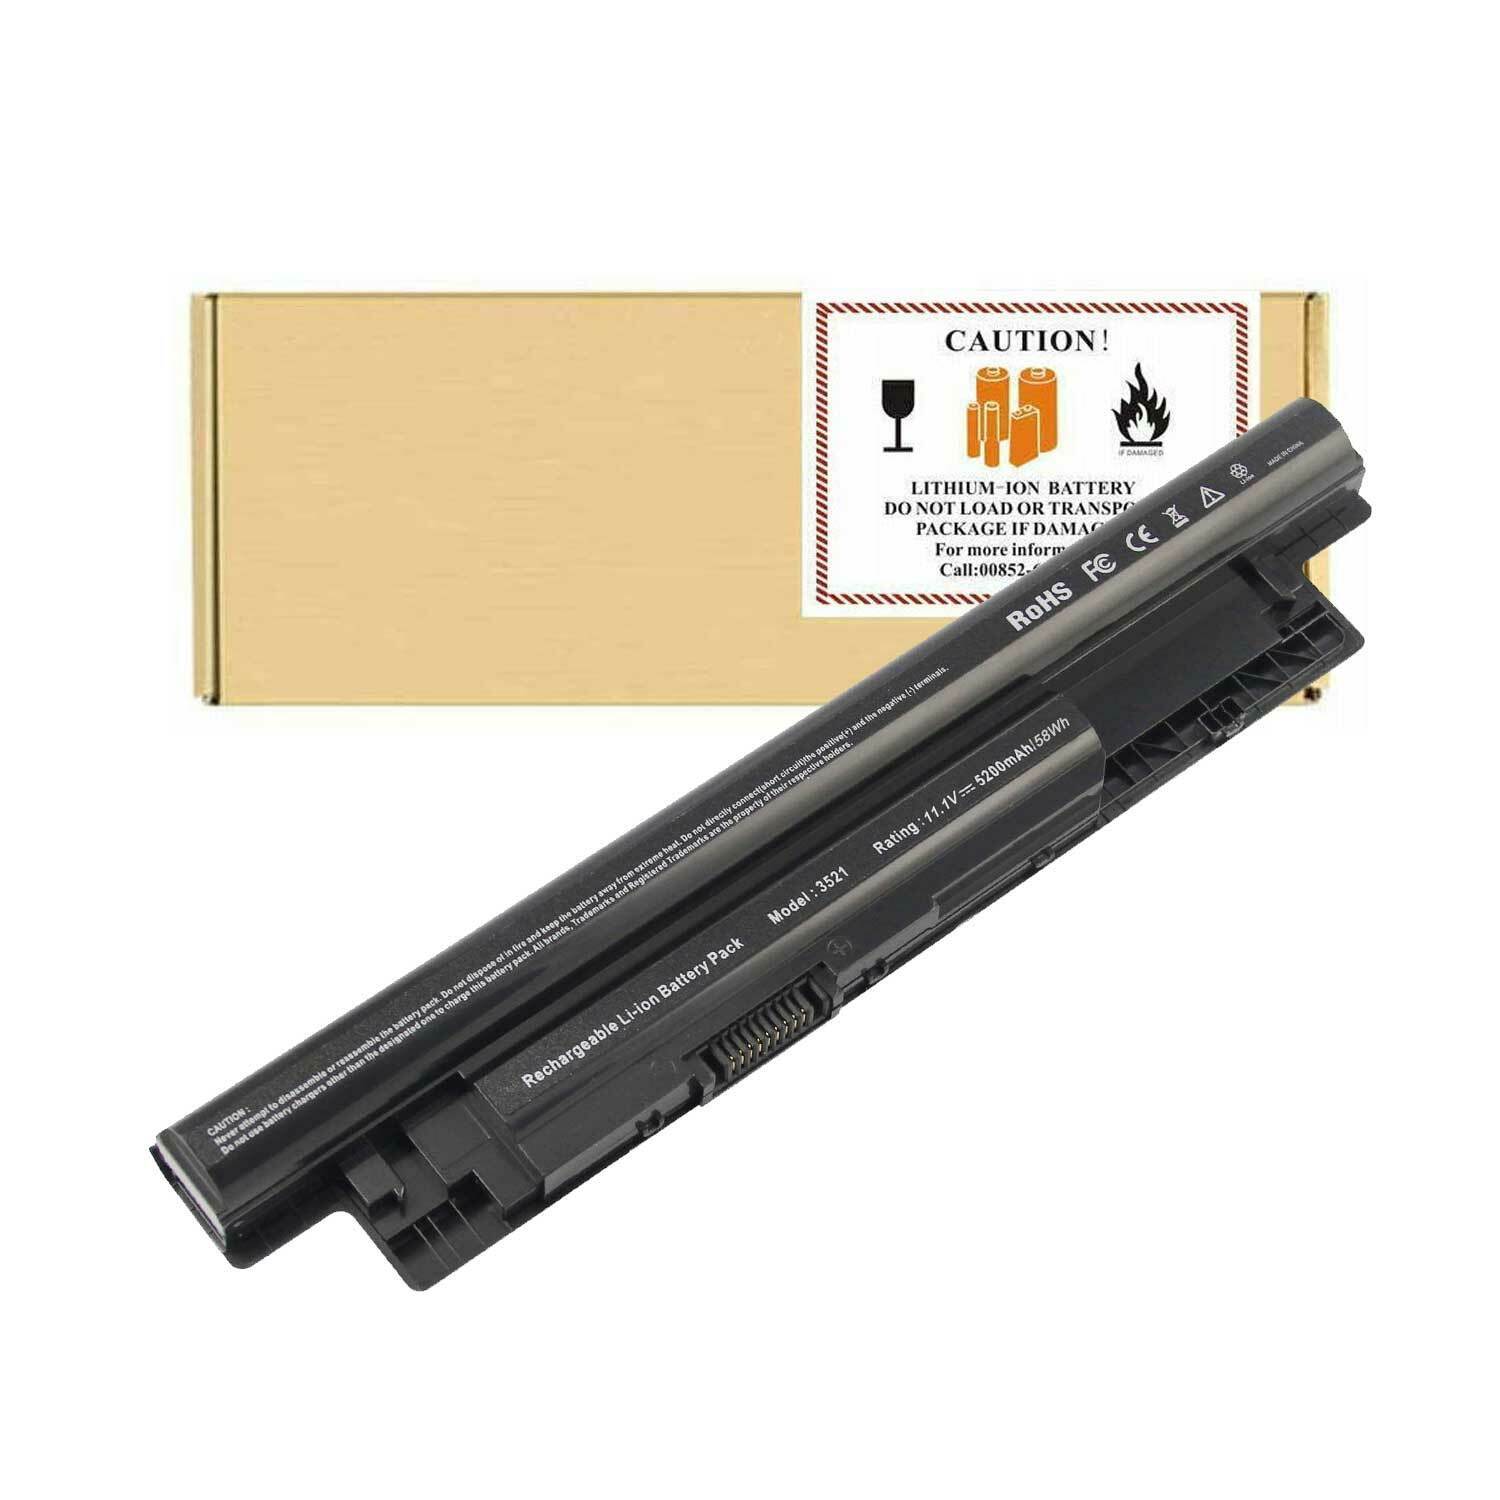 Laptop Replacement Battery for Dell Inspiron M531R (5535) M731R (5735) Laptops